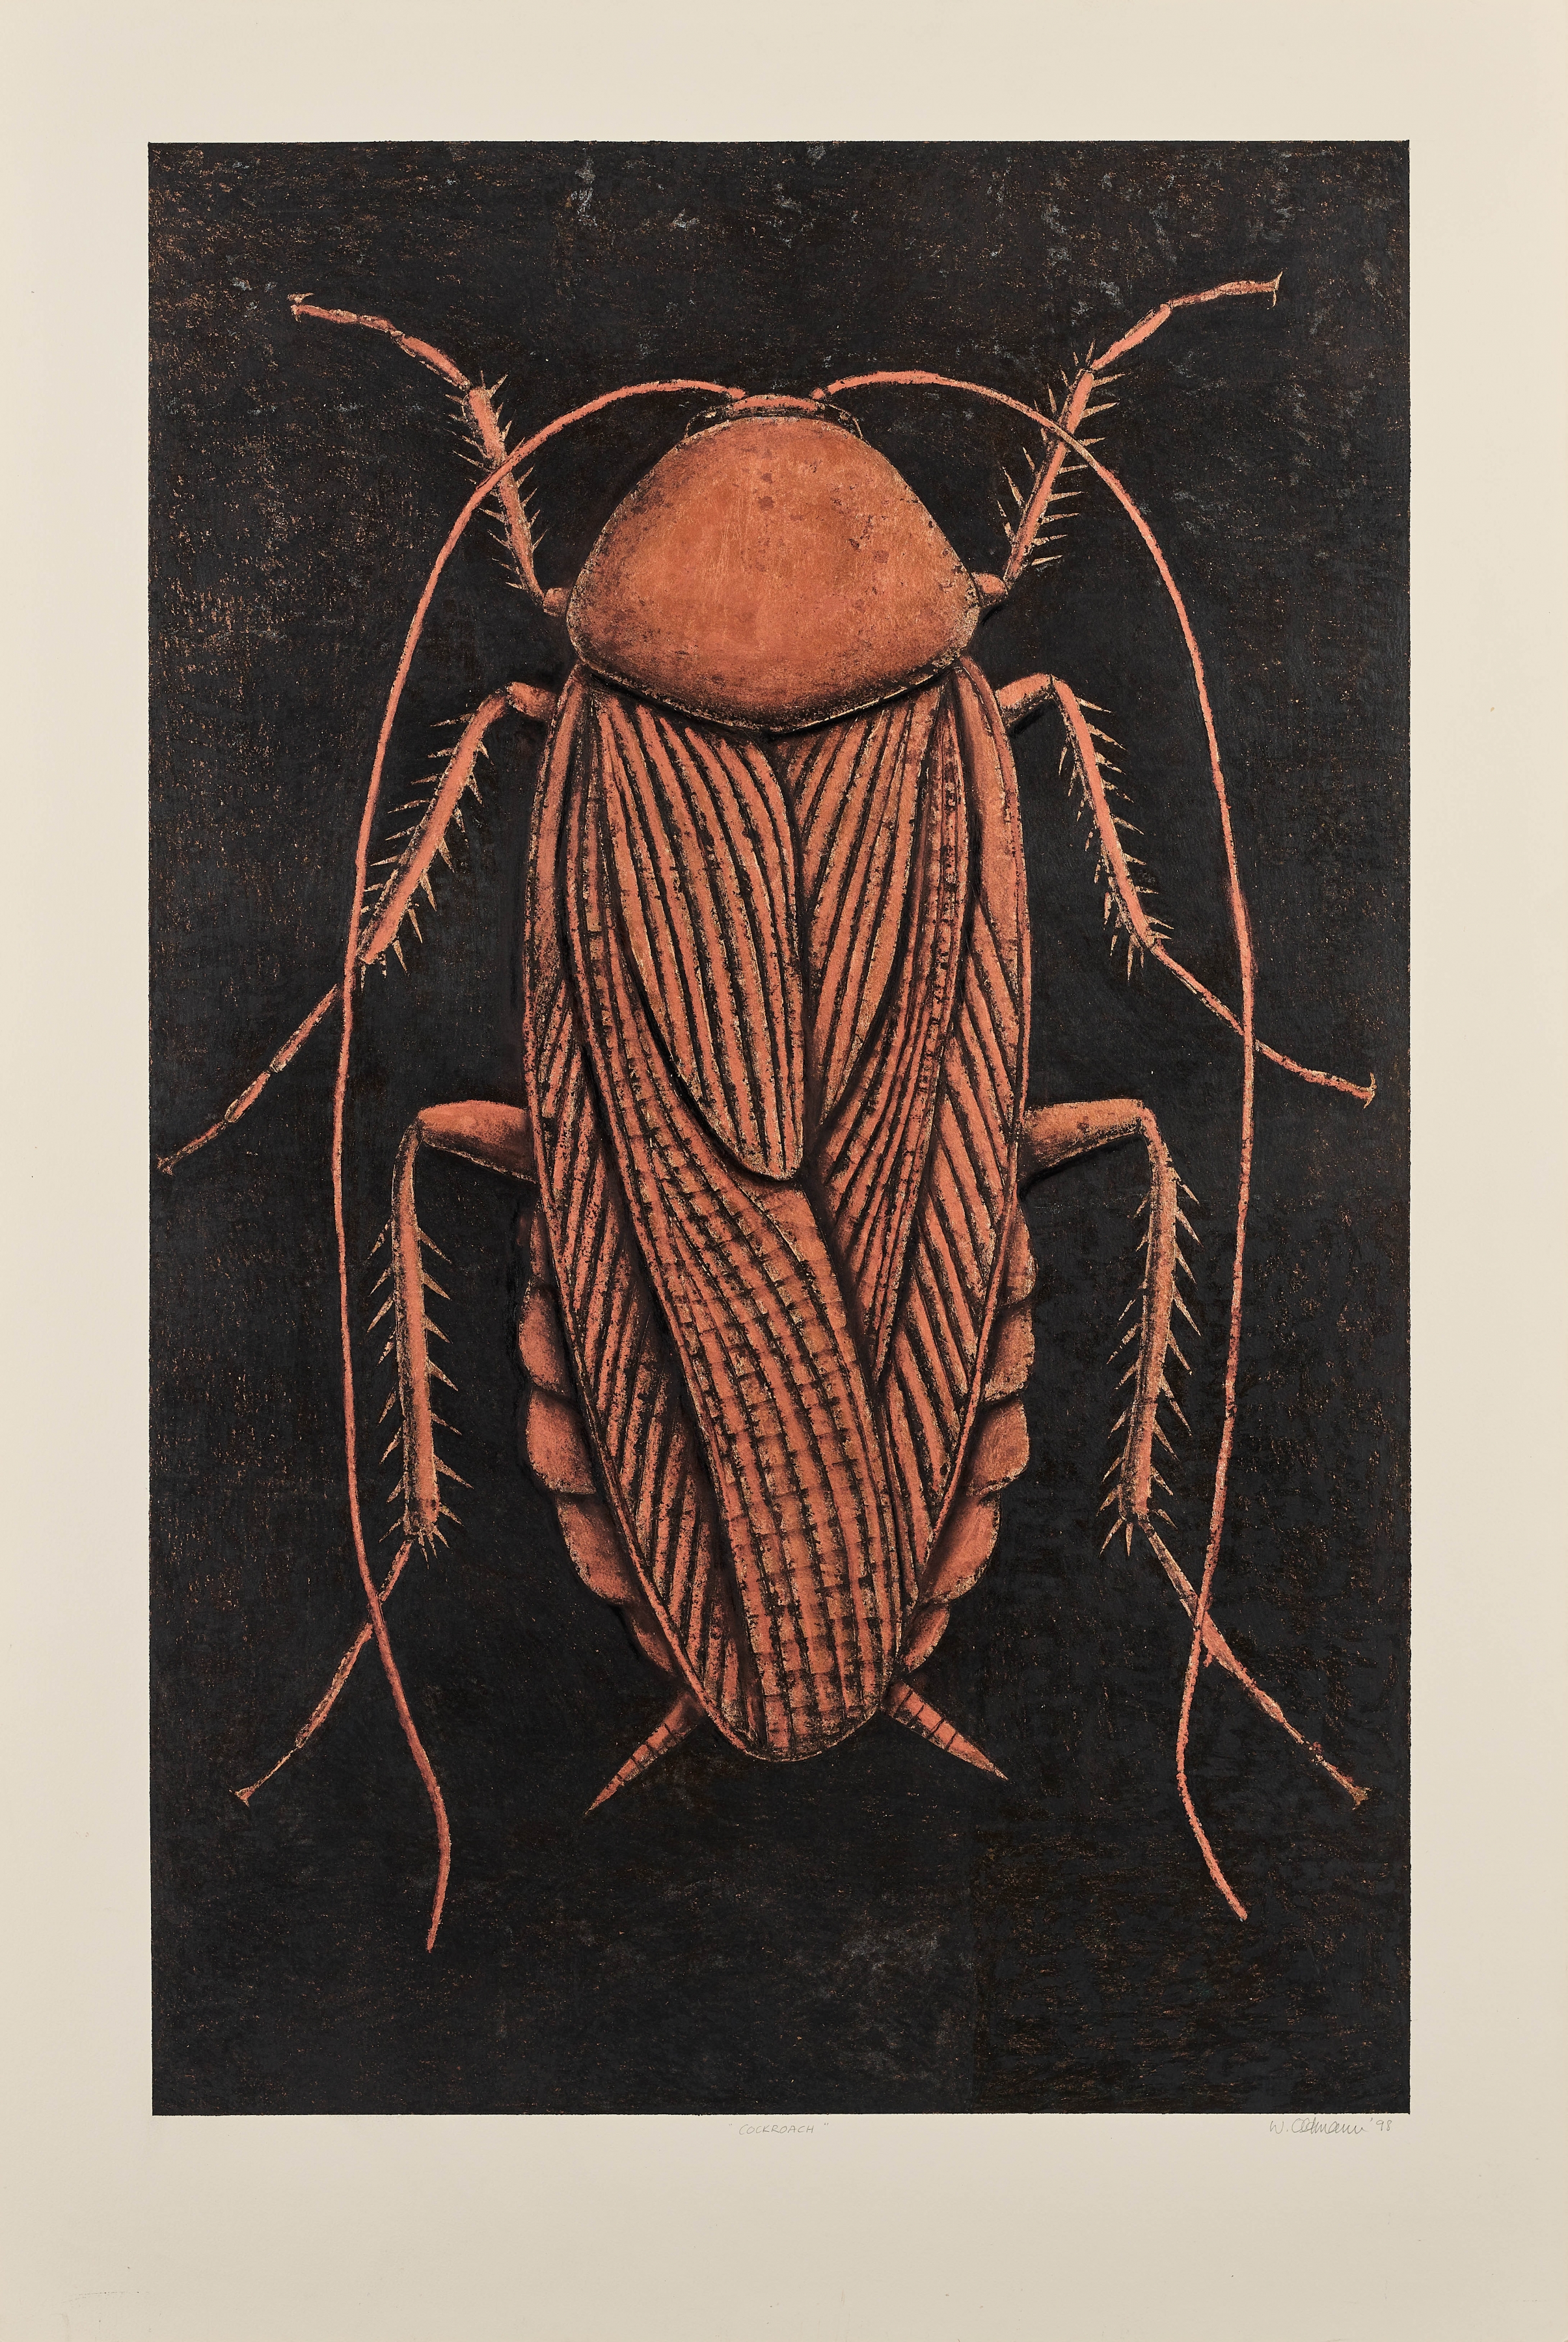 Walter Oltman

Cockroach, 1998

Oil pint, oil stick and copper leaf on paper

Enquire